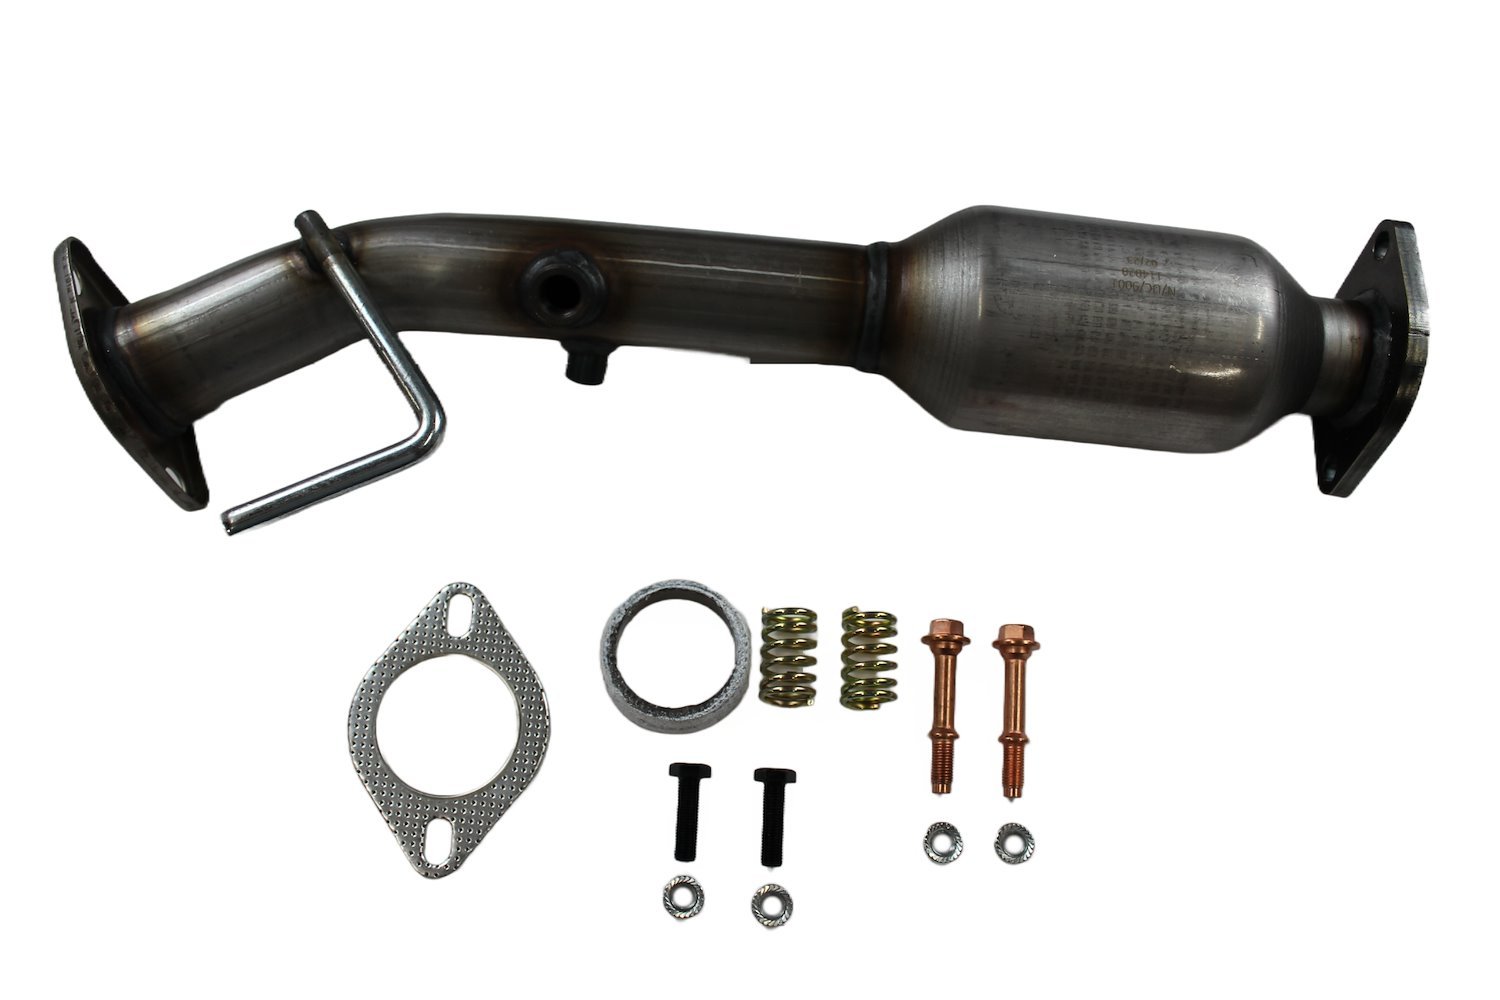 Catalytic Converter Fits 2015-2018 Chevrolet City Express, 2013-2020 Nissan NV200 w/2.0L 4 cyl. Eng. [Rear]